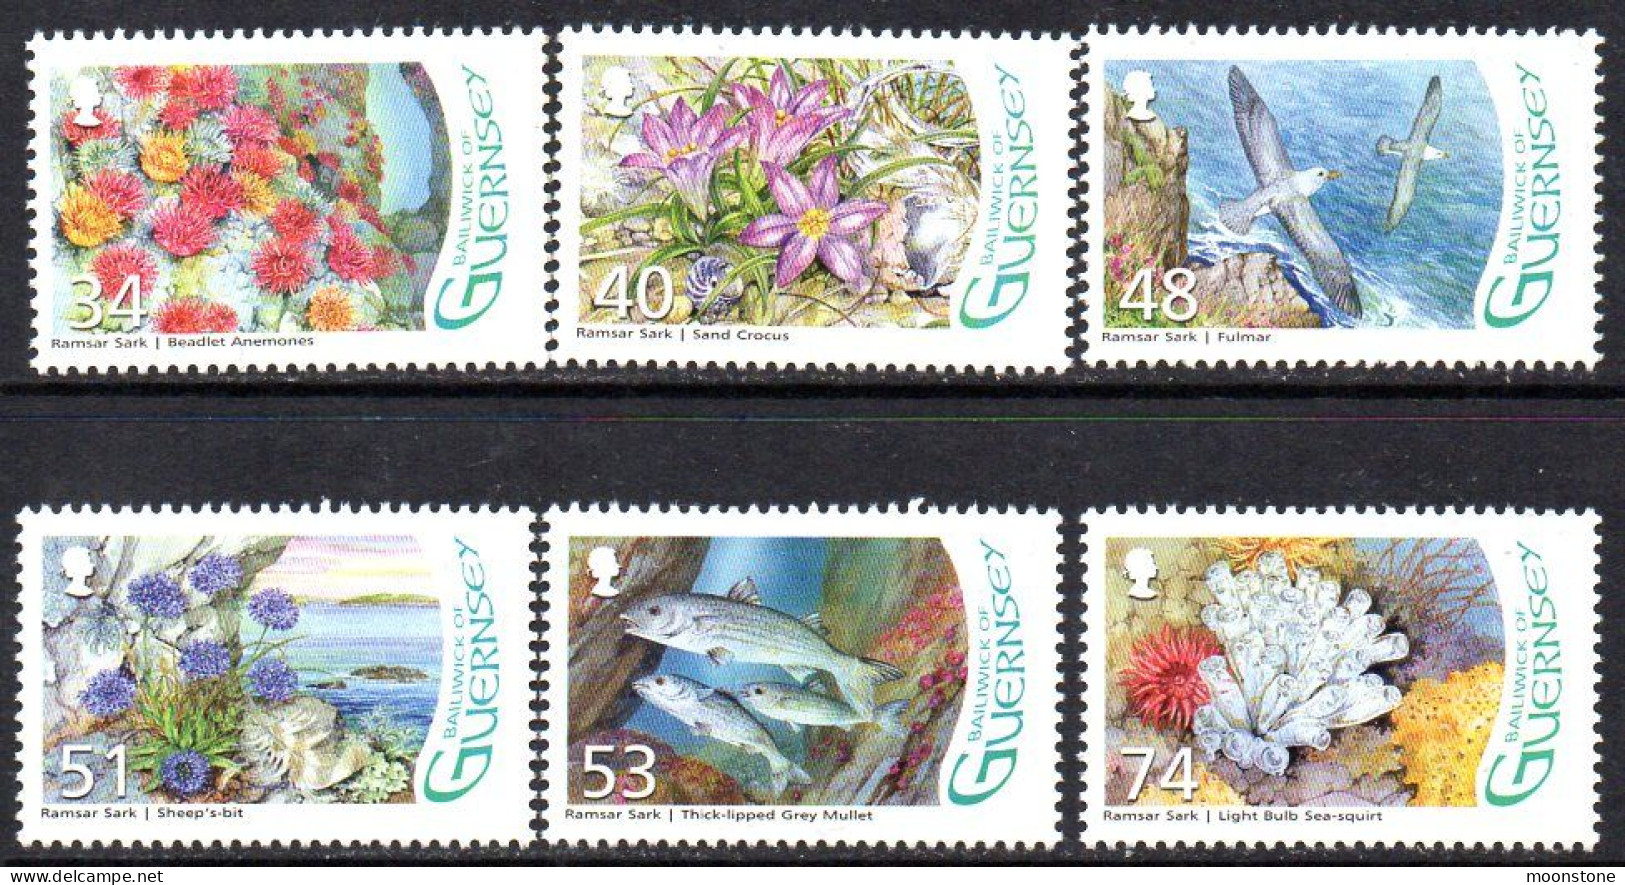 Guernsey 2008 Gouliot Caves, Sark, Ramsar Site Set Of 6, MNH, SG 1199/1204 - Guernesey